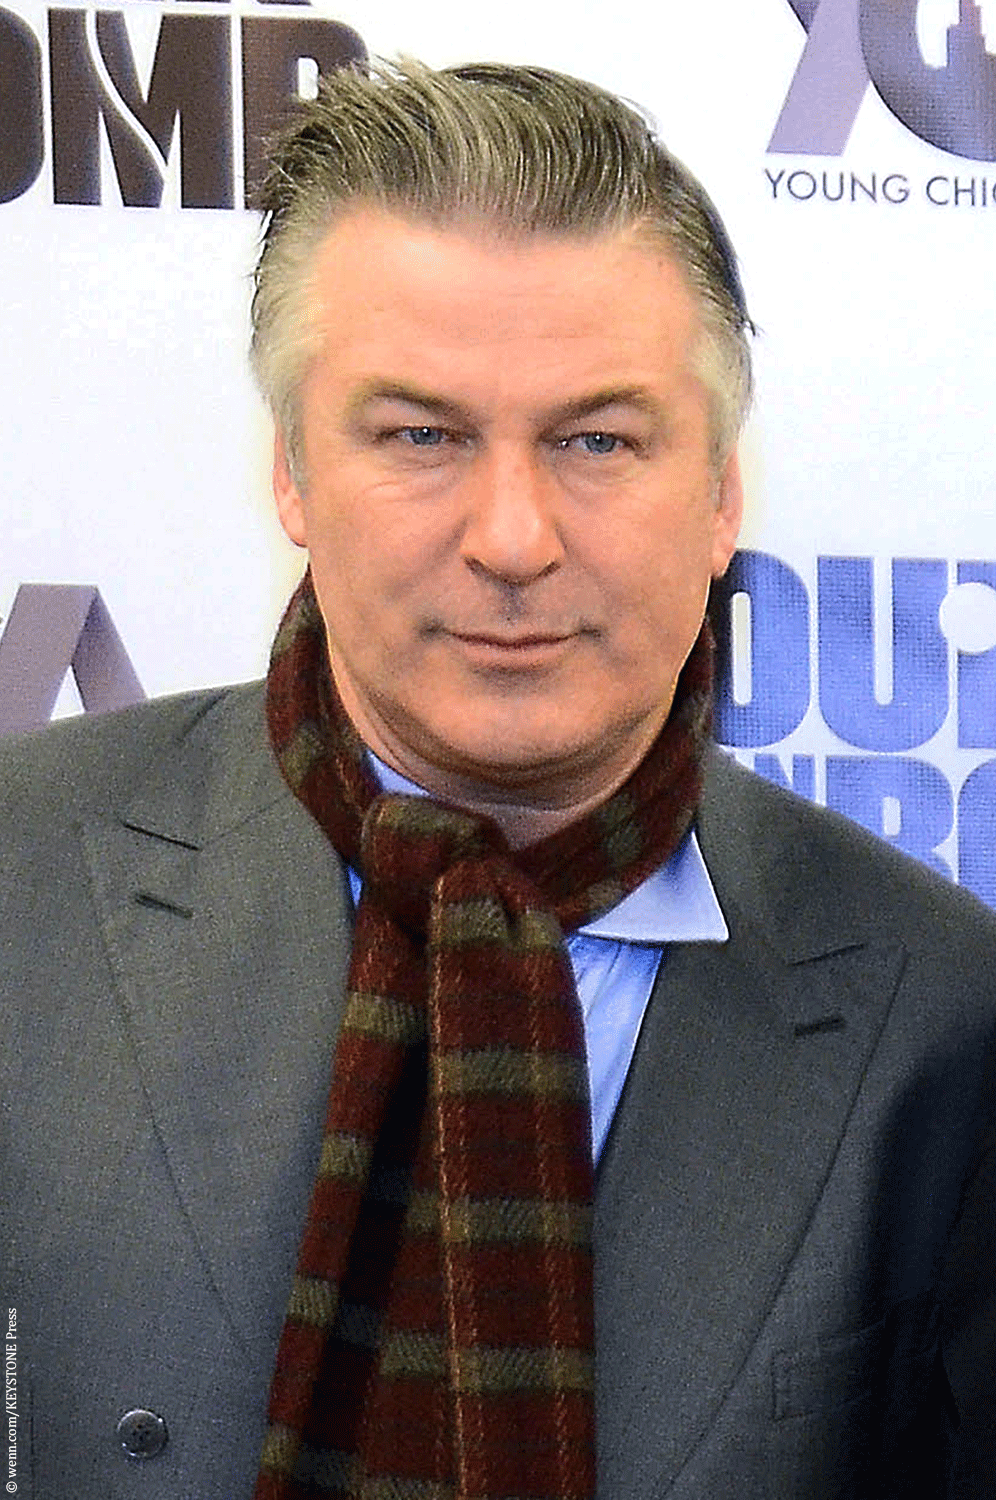 Alec Baldwin was also paid $300,000 an episode for 30 Rock. Alec starred as Jack Donaghy for all seven seasons of the show until it ended in 2013.